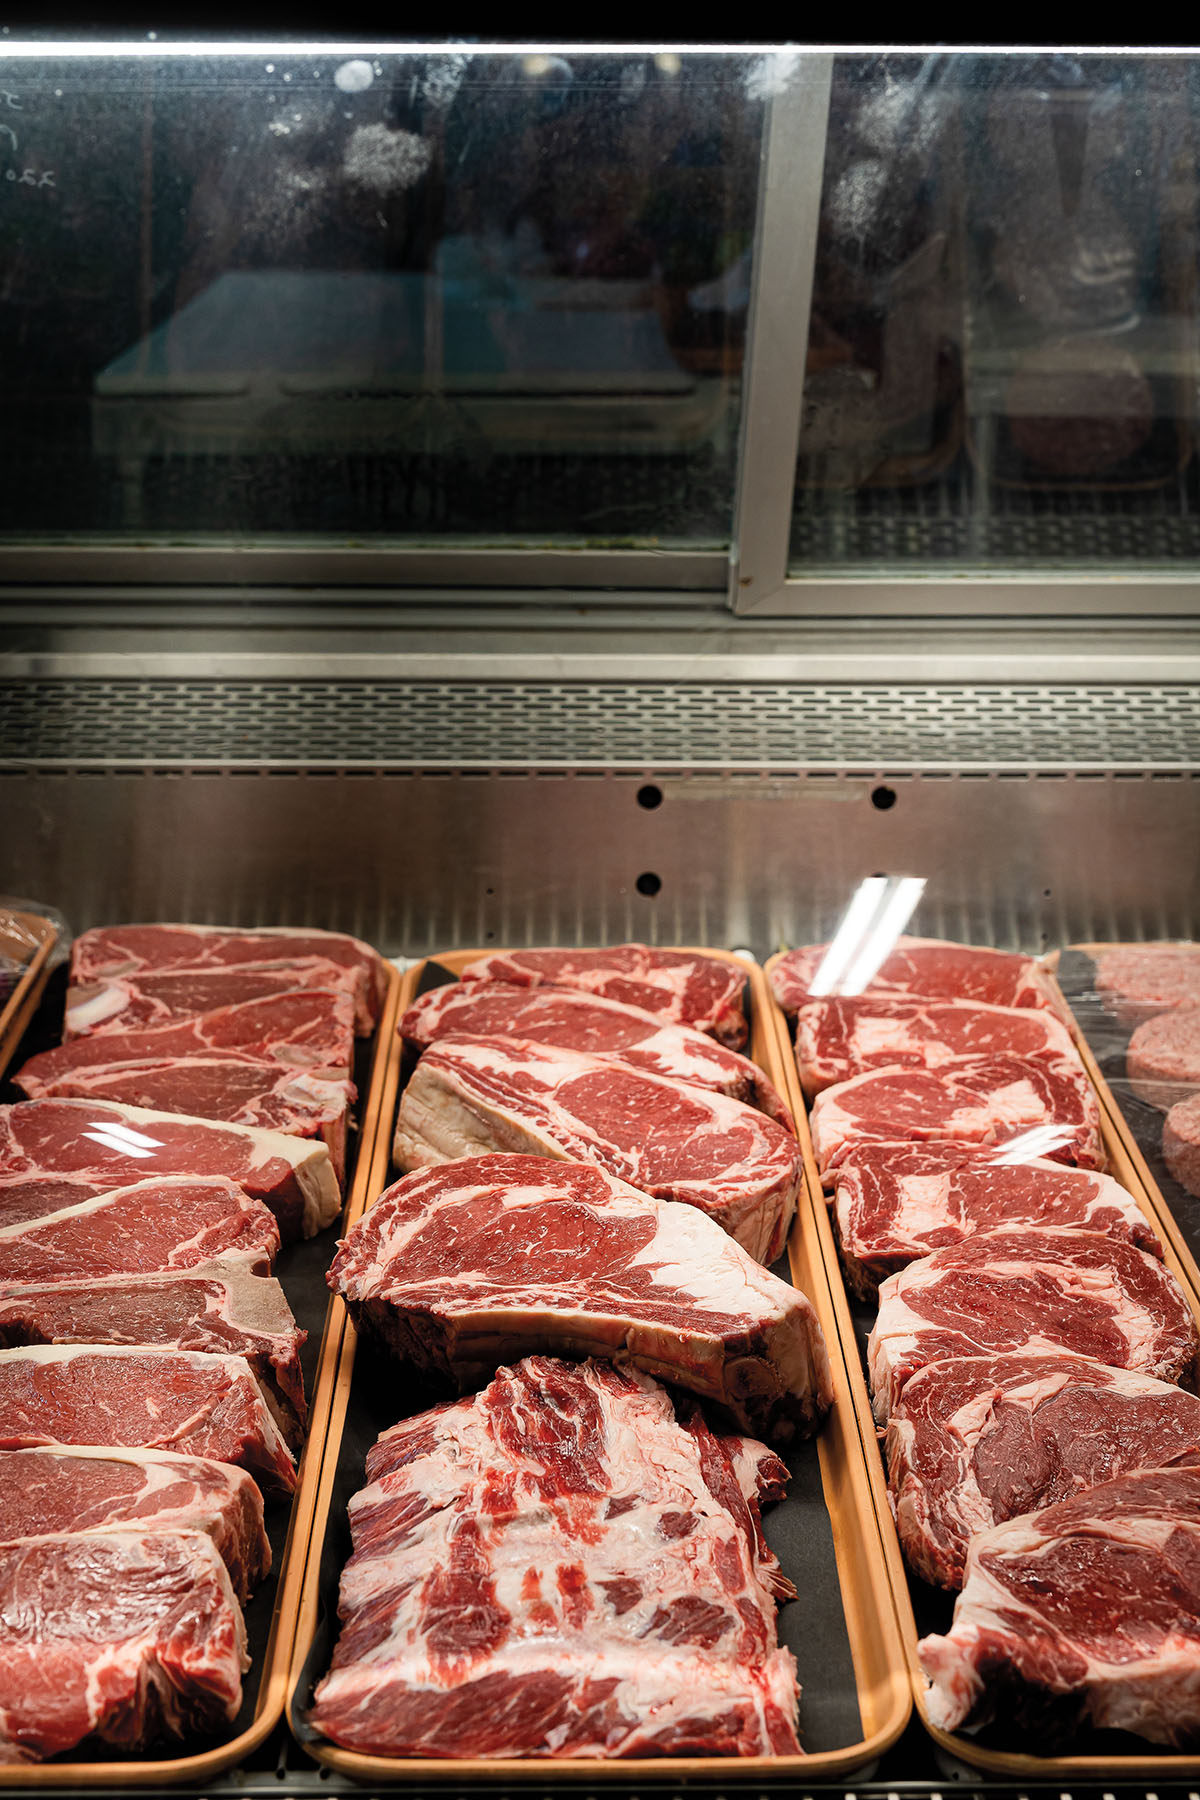 Large pieces of beef inside of a cooler display case